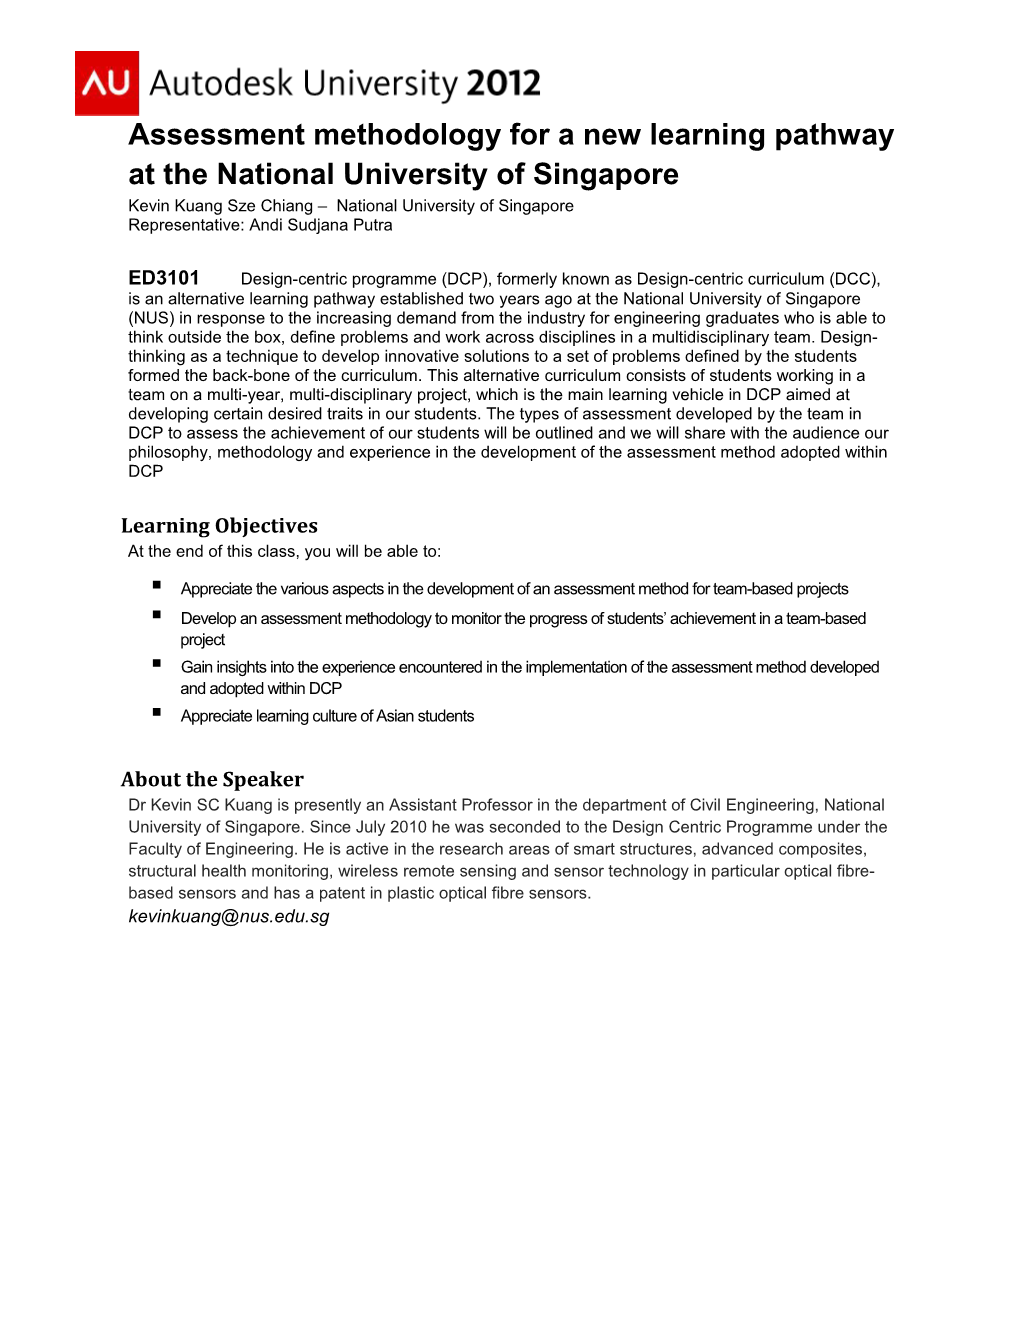 ED3101 - Assessment Methodology for a New Learning Pathway at the National University